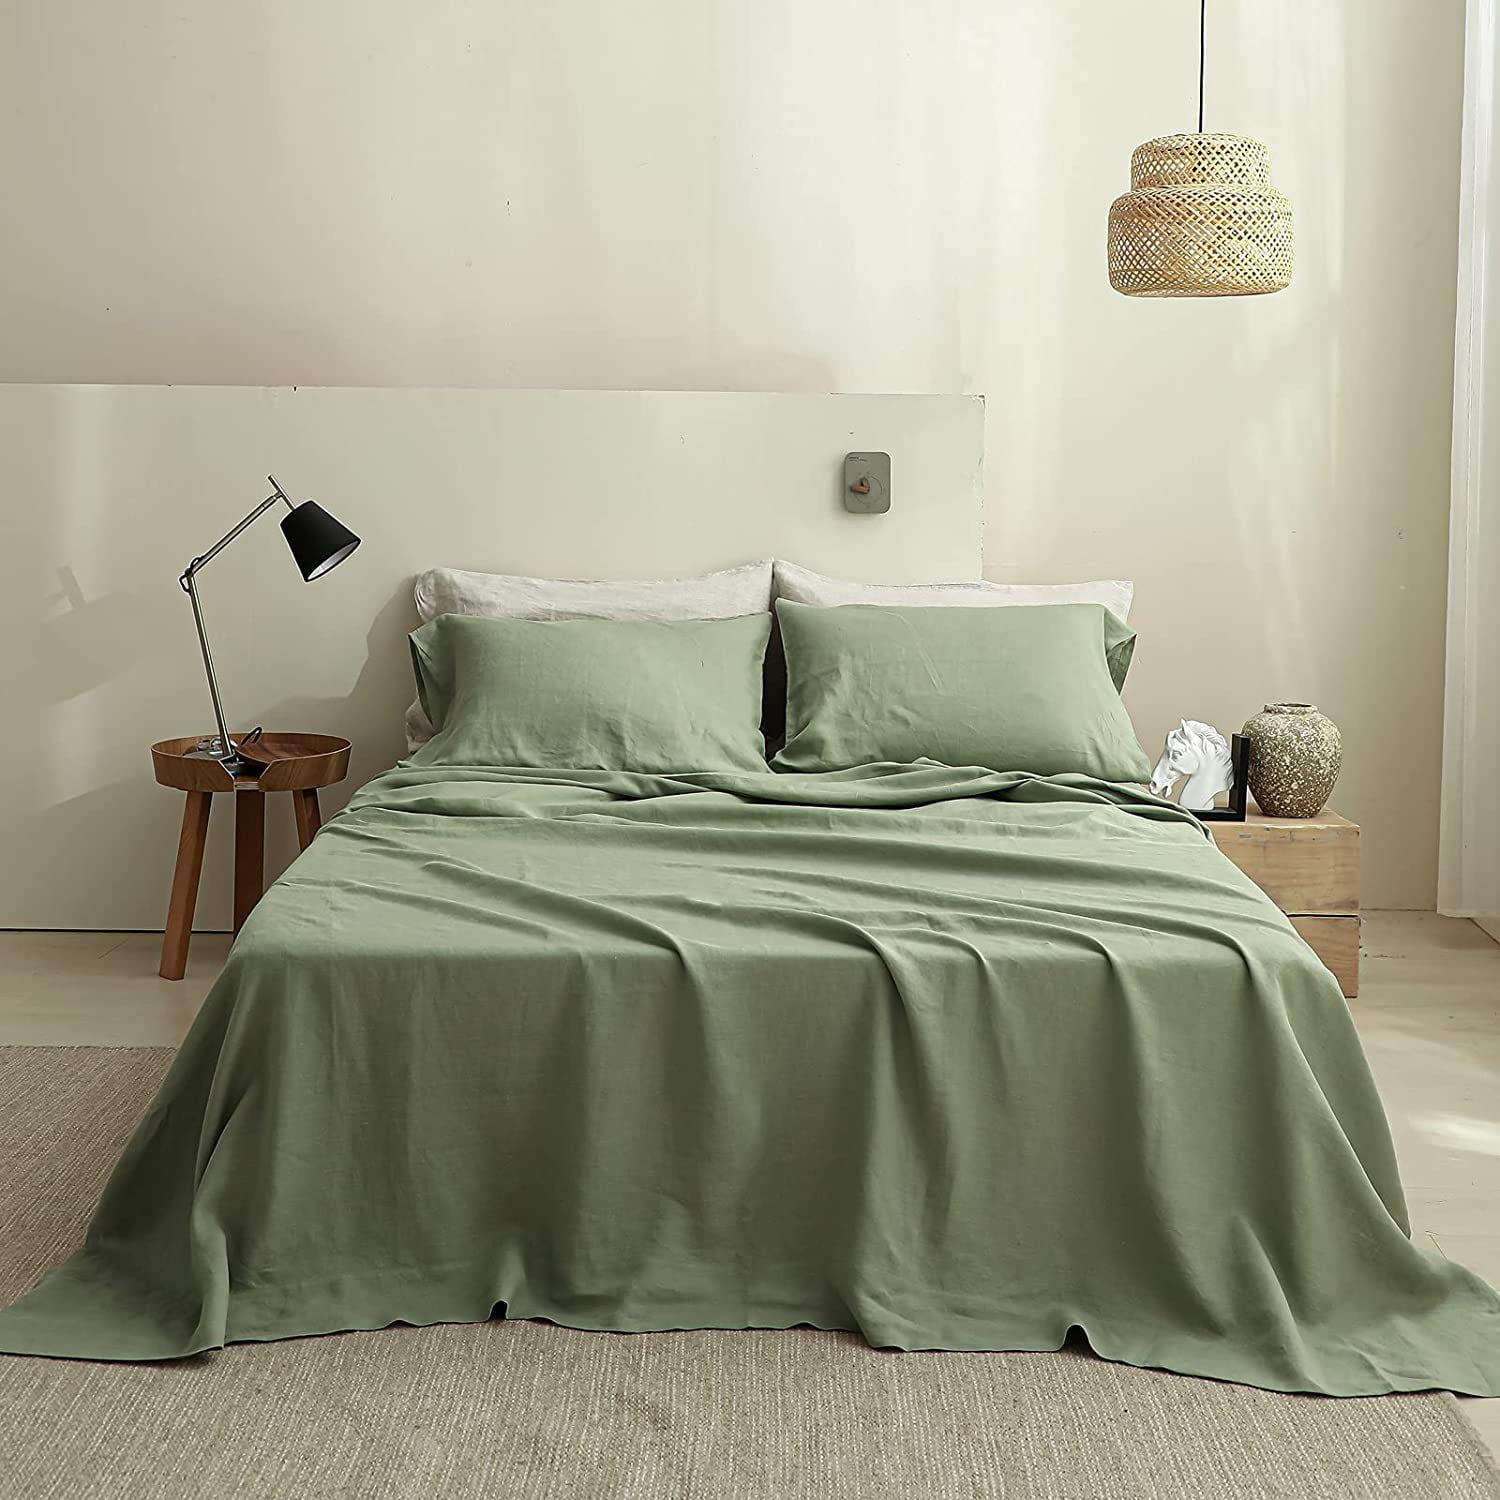 Beige natural linen bedding SET includes duvet cover + 2 pillowcases Twin Full Queen King size. Sustainable material